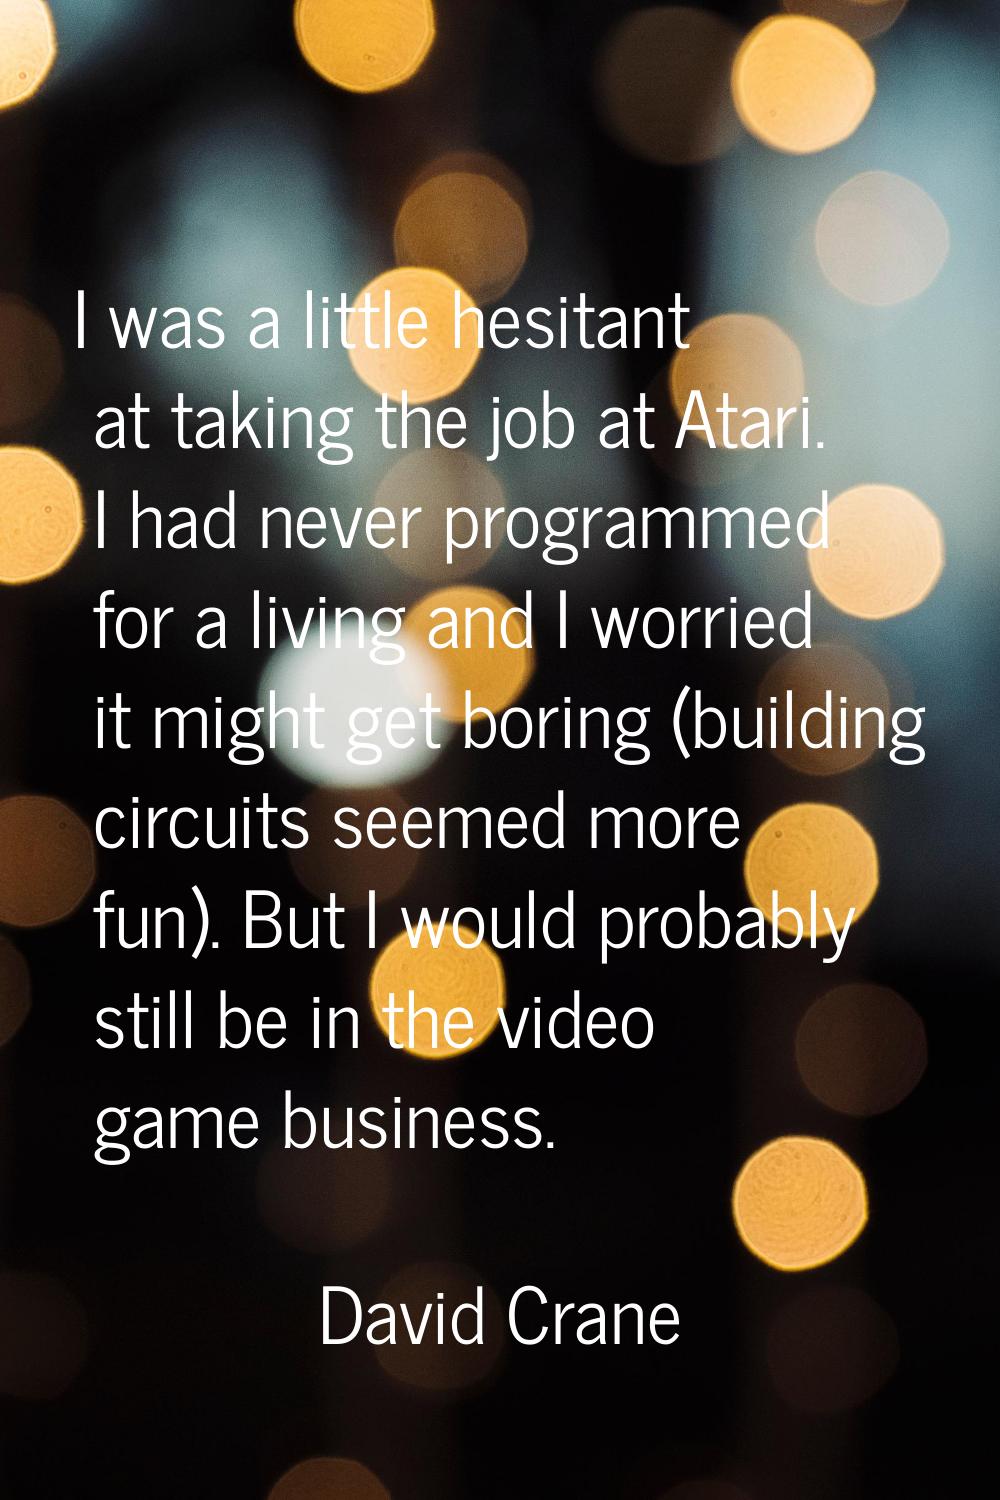 I was a little hesitant at taking the job at Atari. I had never programmed for a living and I worri